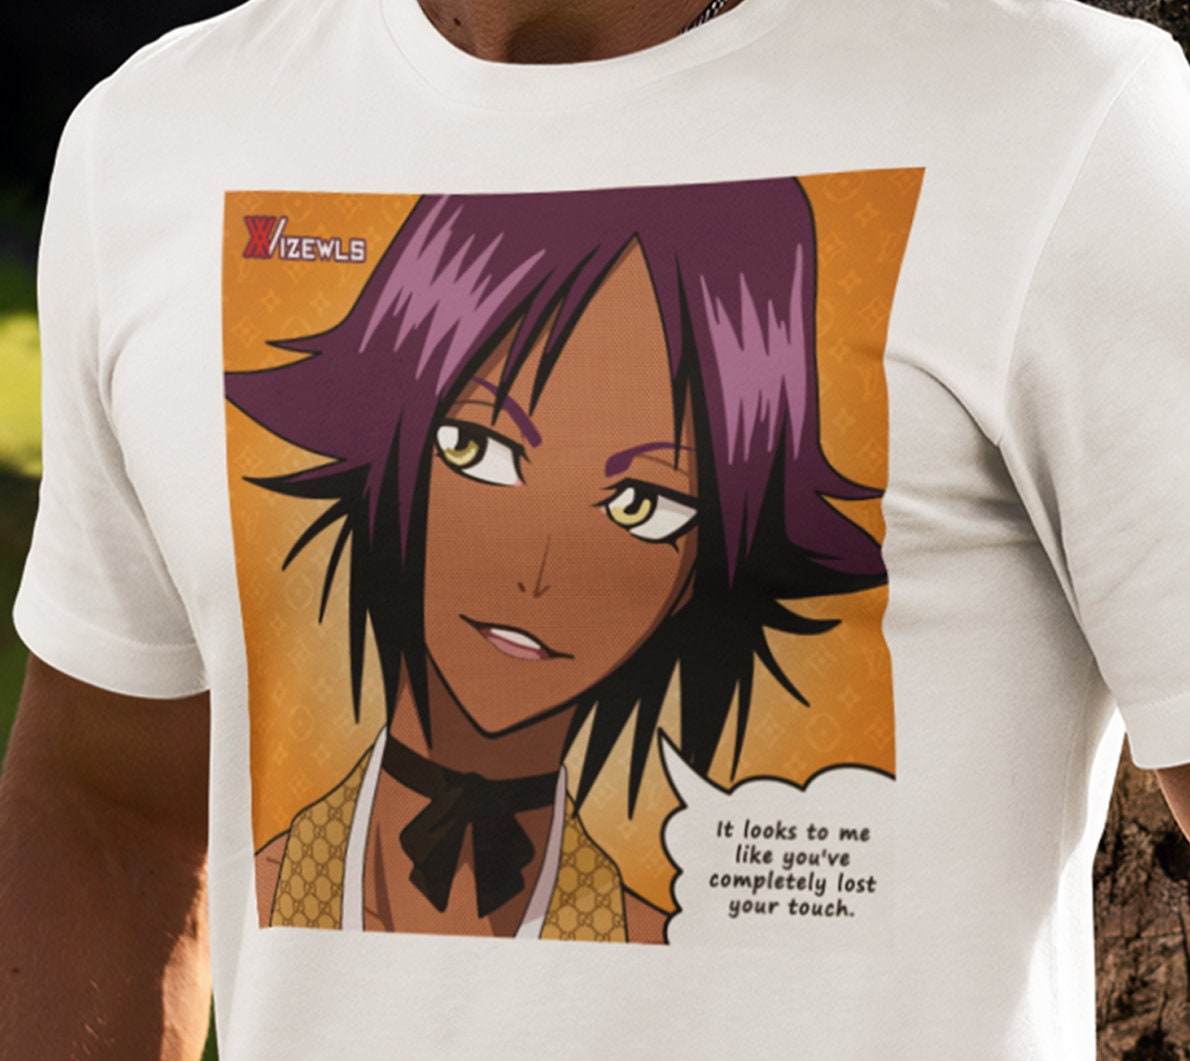 Buy Bleach Anime Apparel Online In India  Etsy India